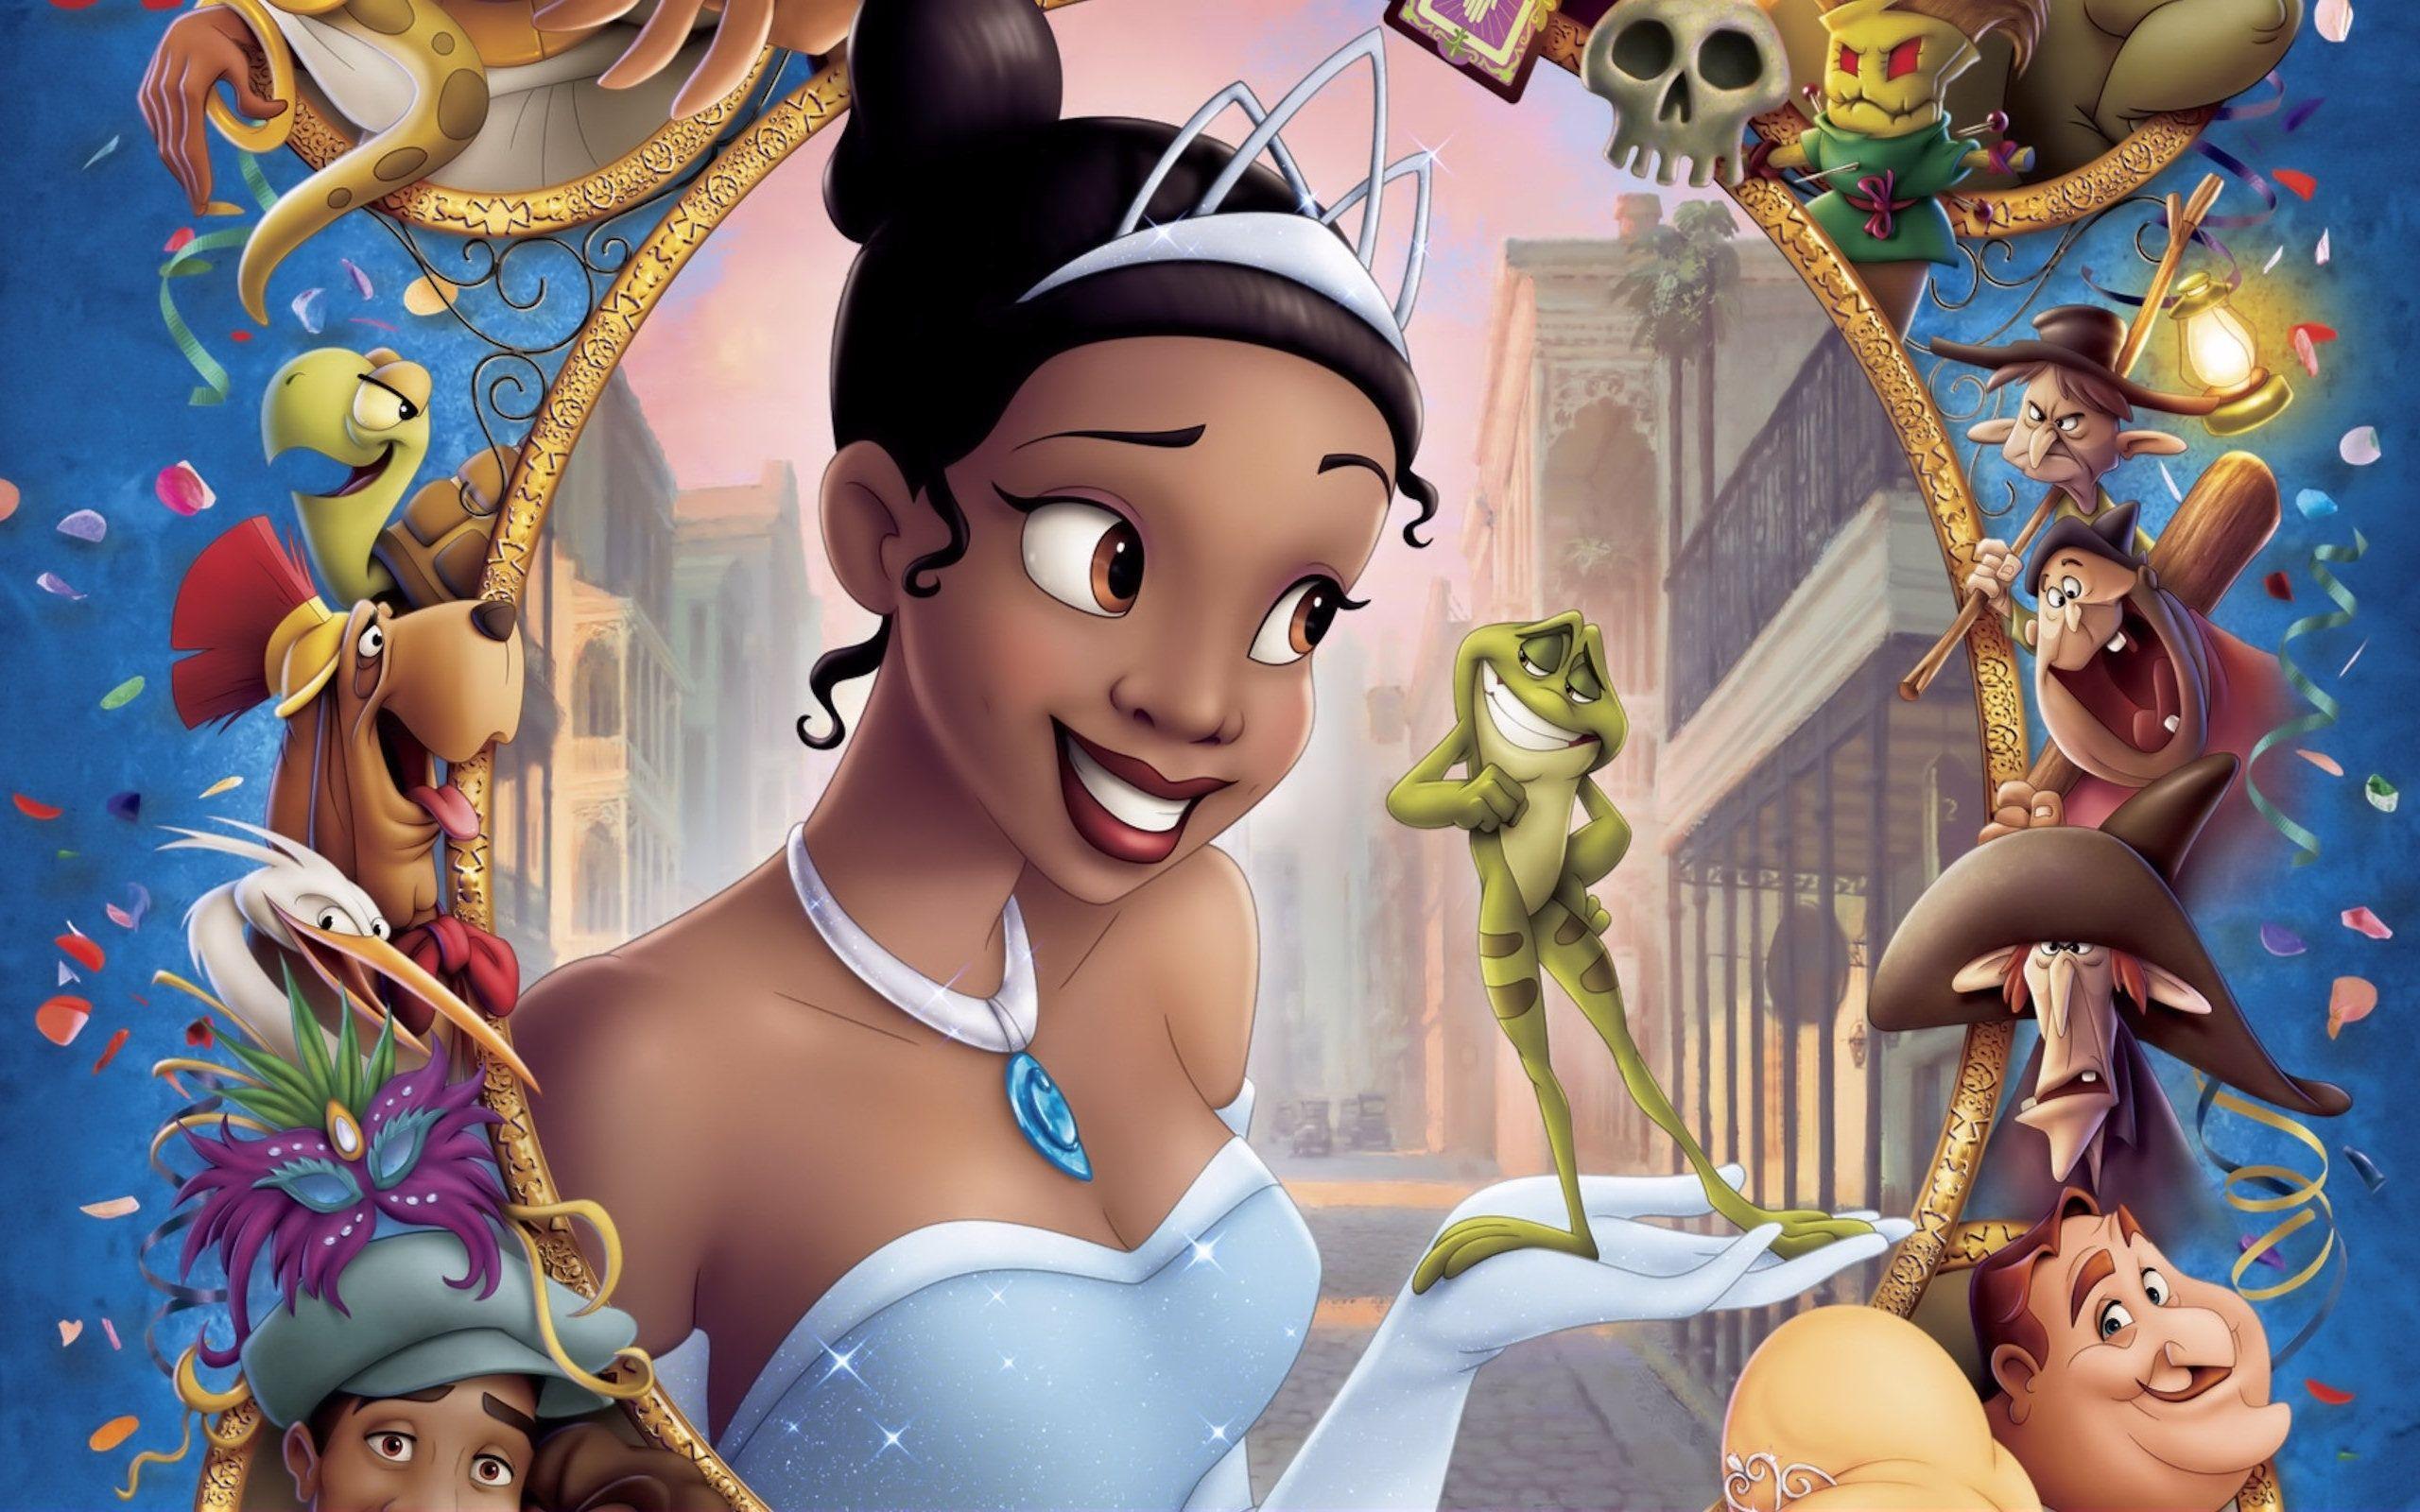 The Princess And The Frog HD Wallpaper. Background